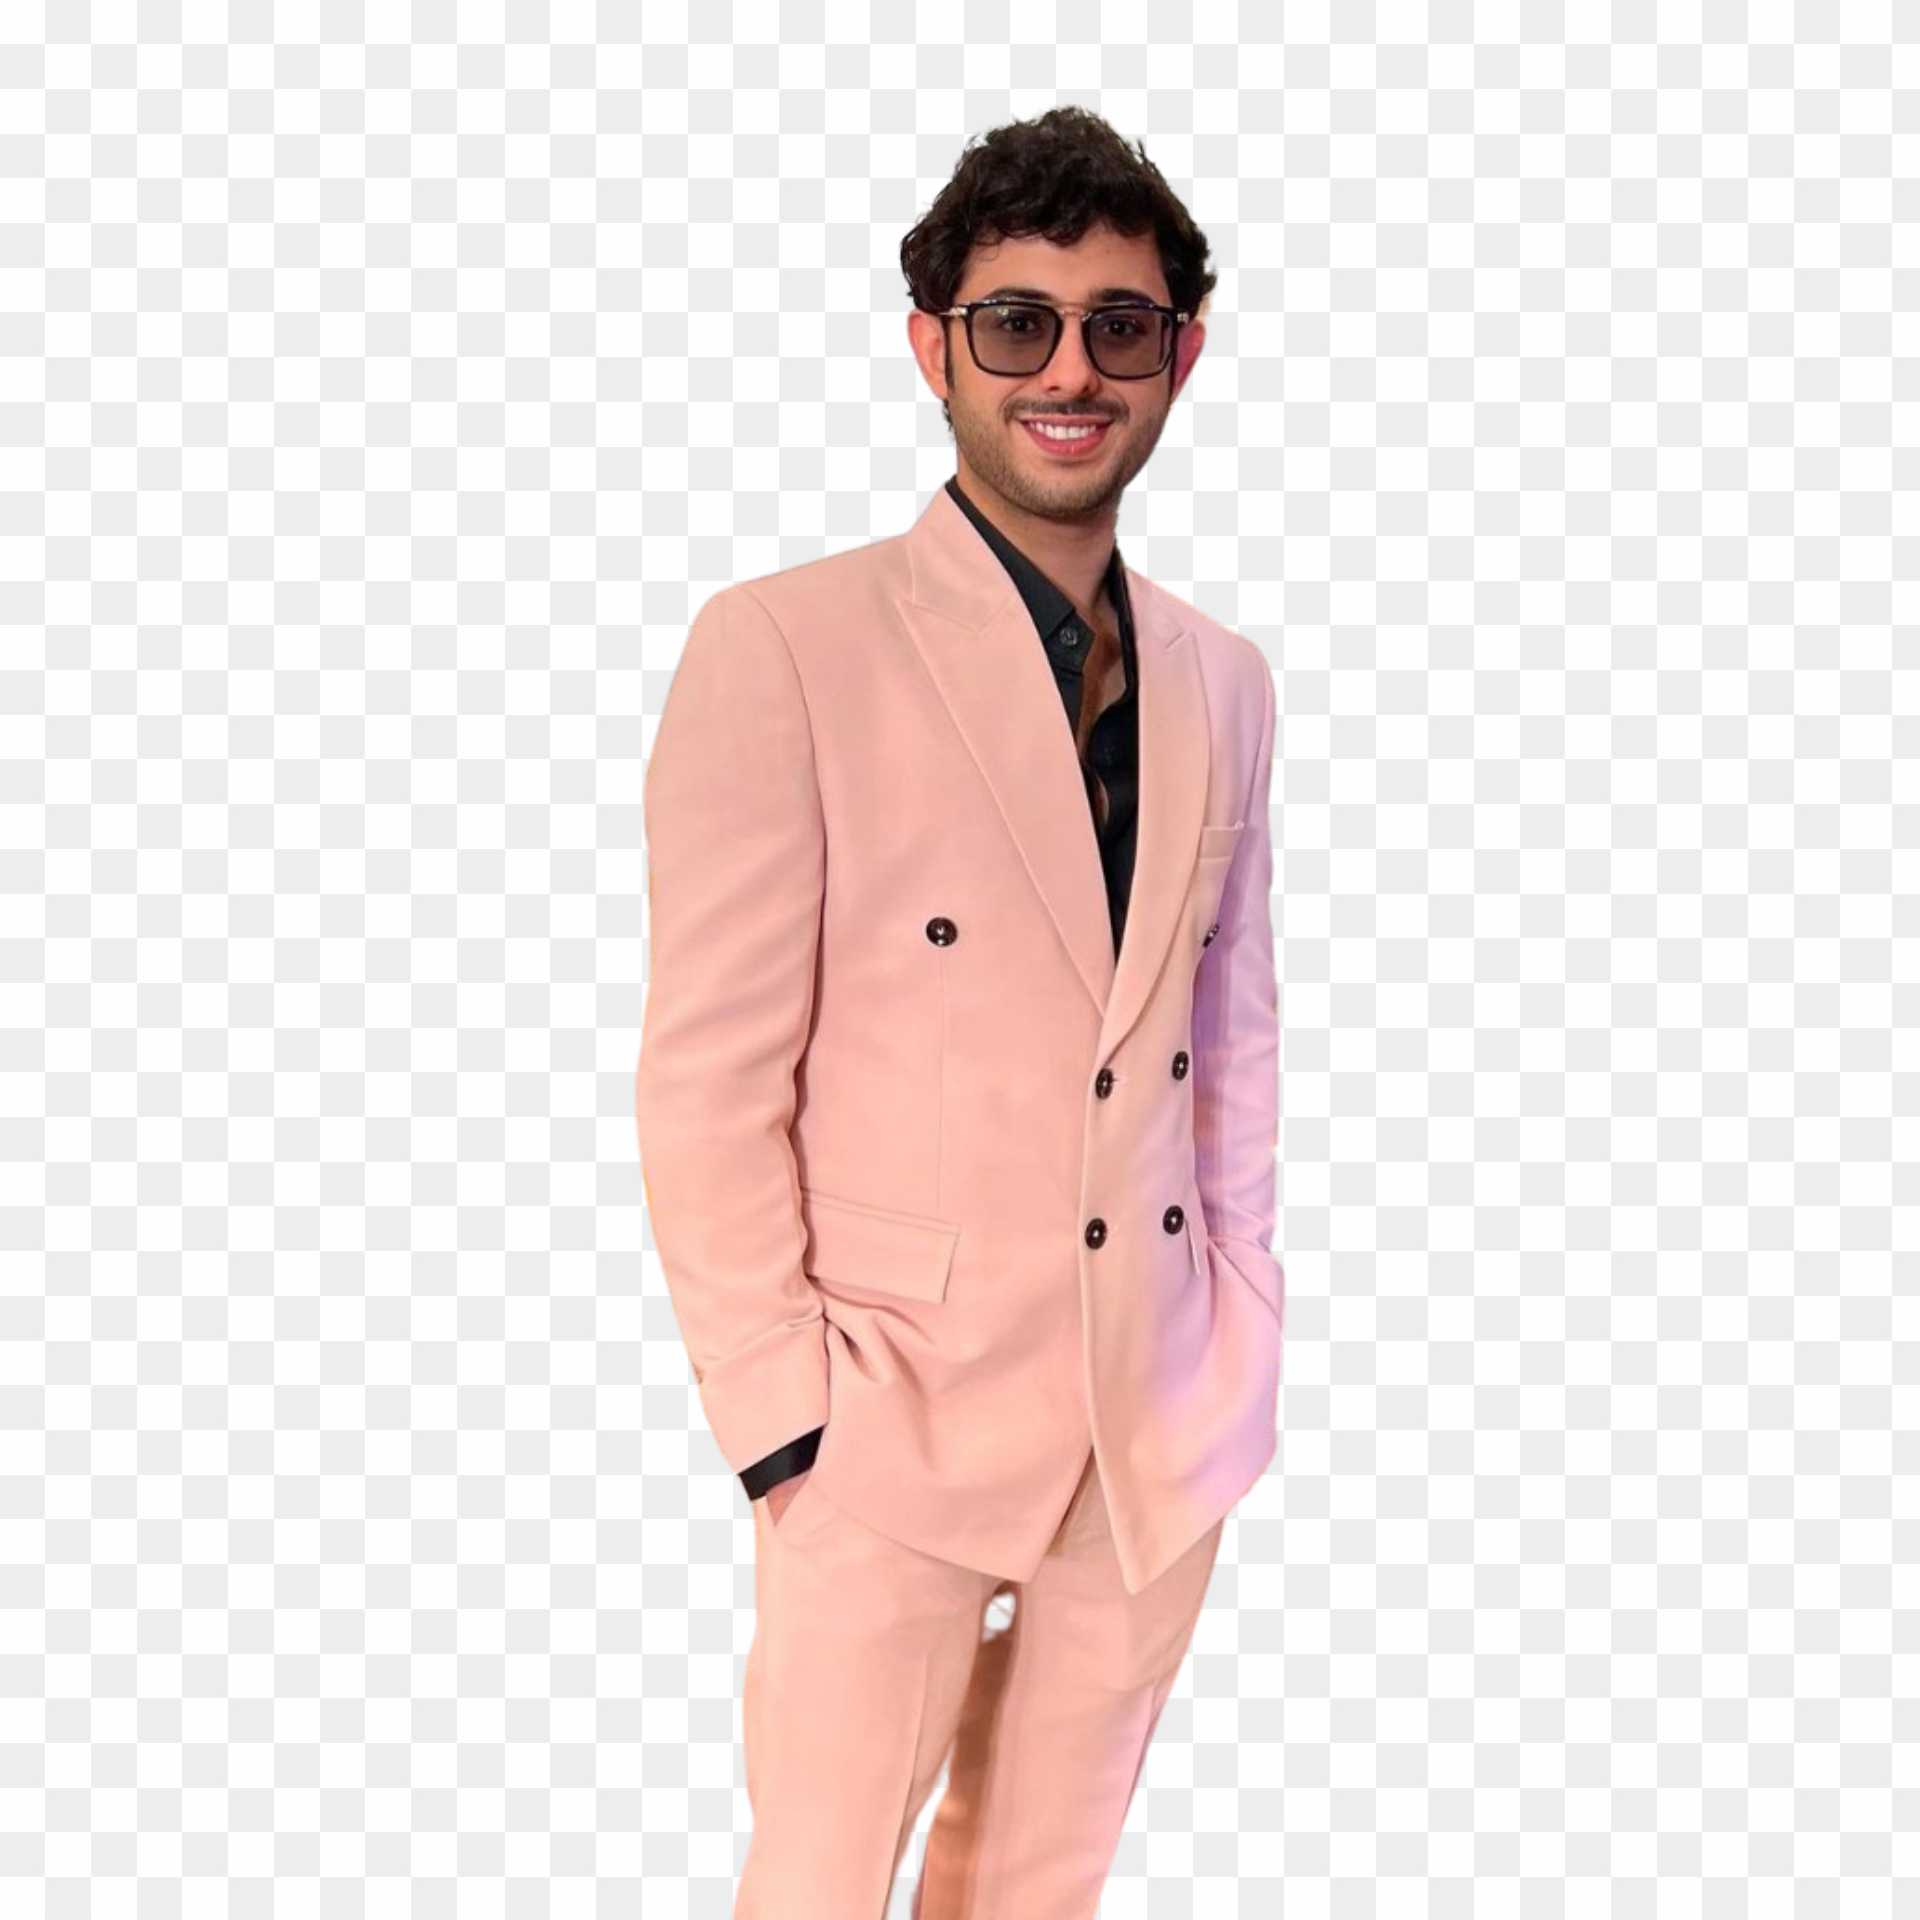 Carryminati full HD png images download 